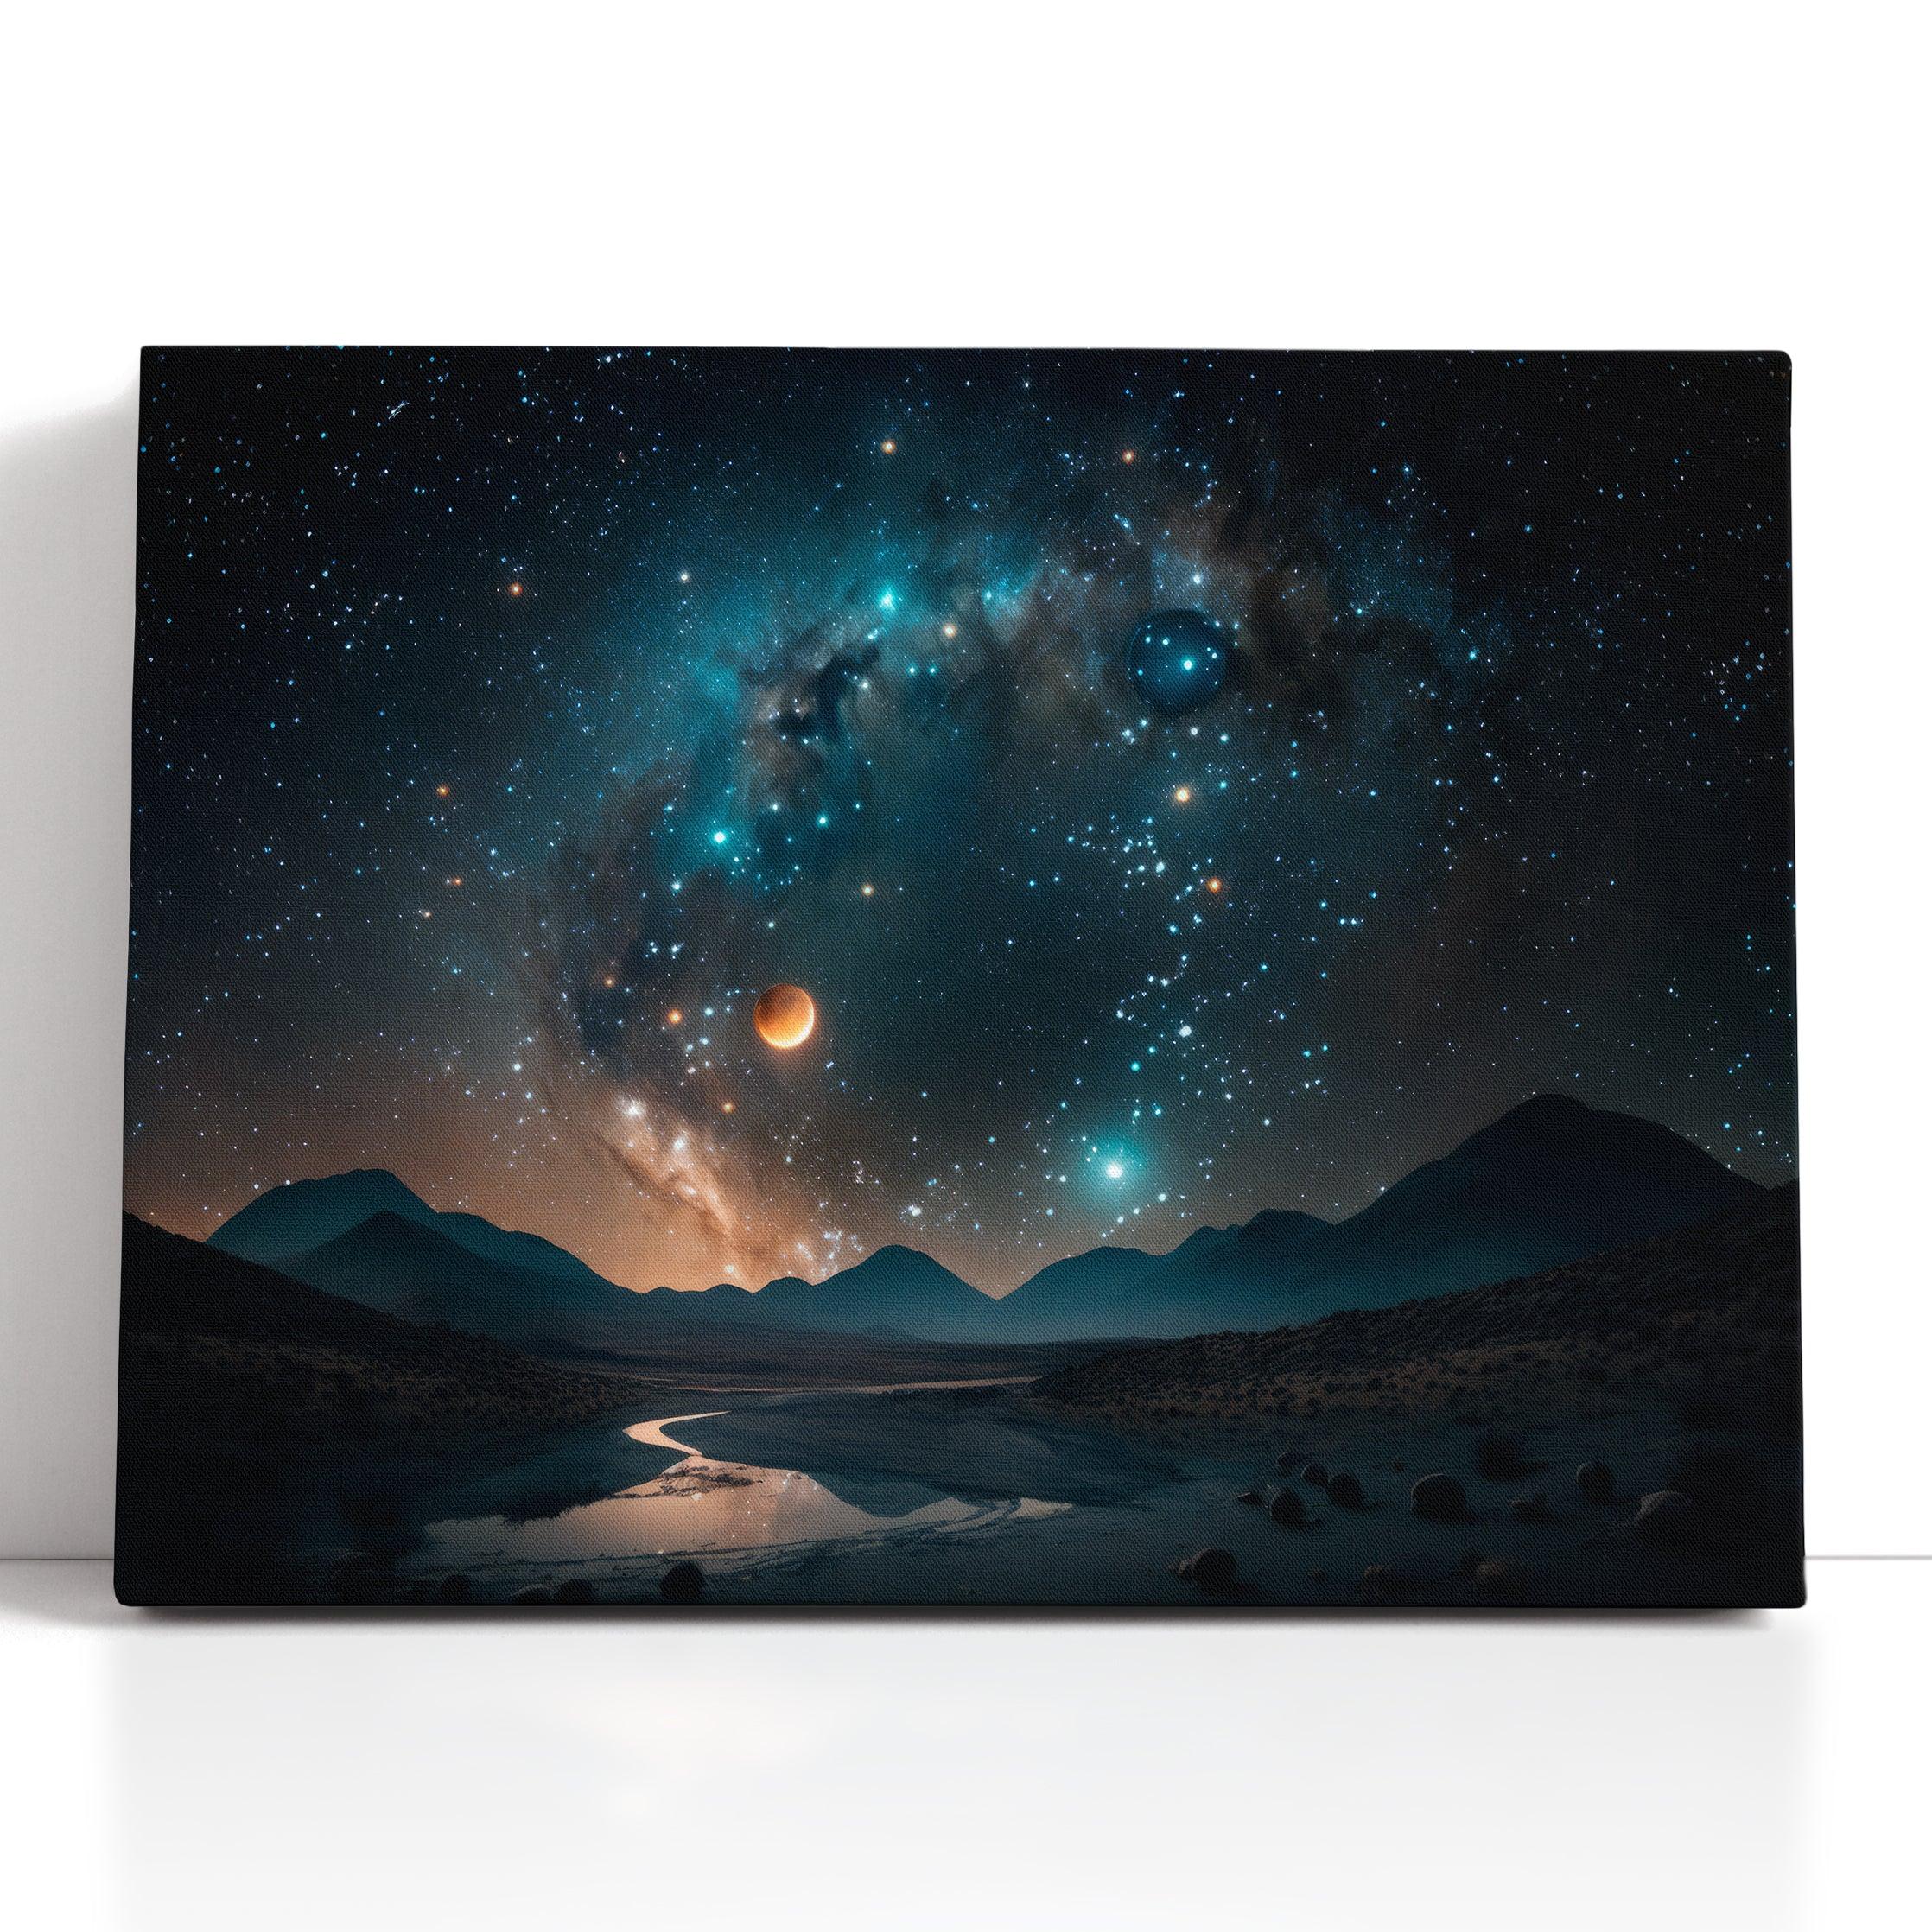 Blue Constellation in the Night Sky - Canvas Print - Artoholica Ready to Hang Canvas Print